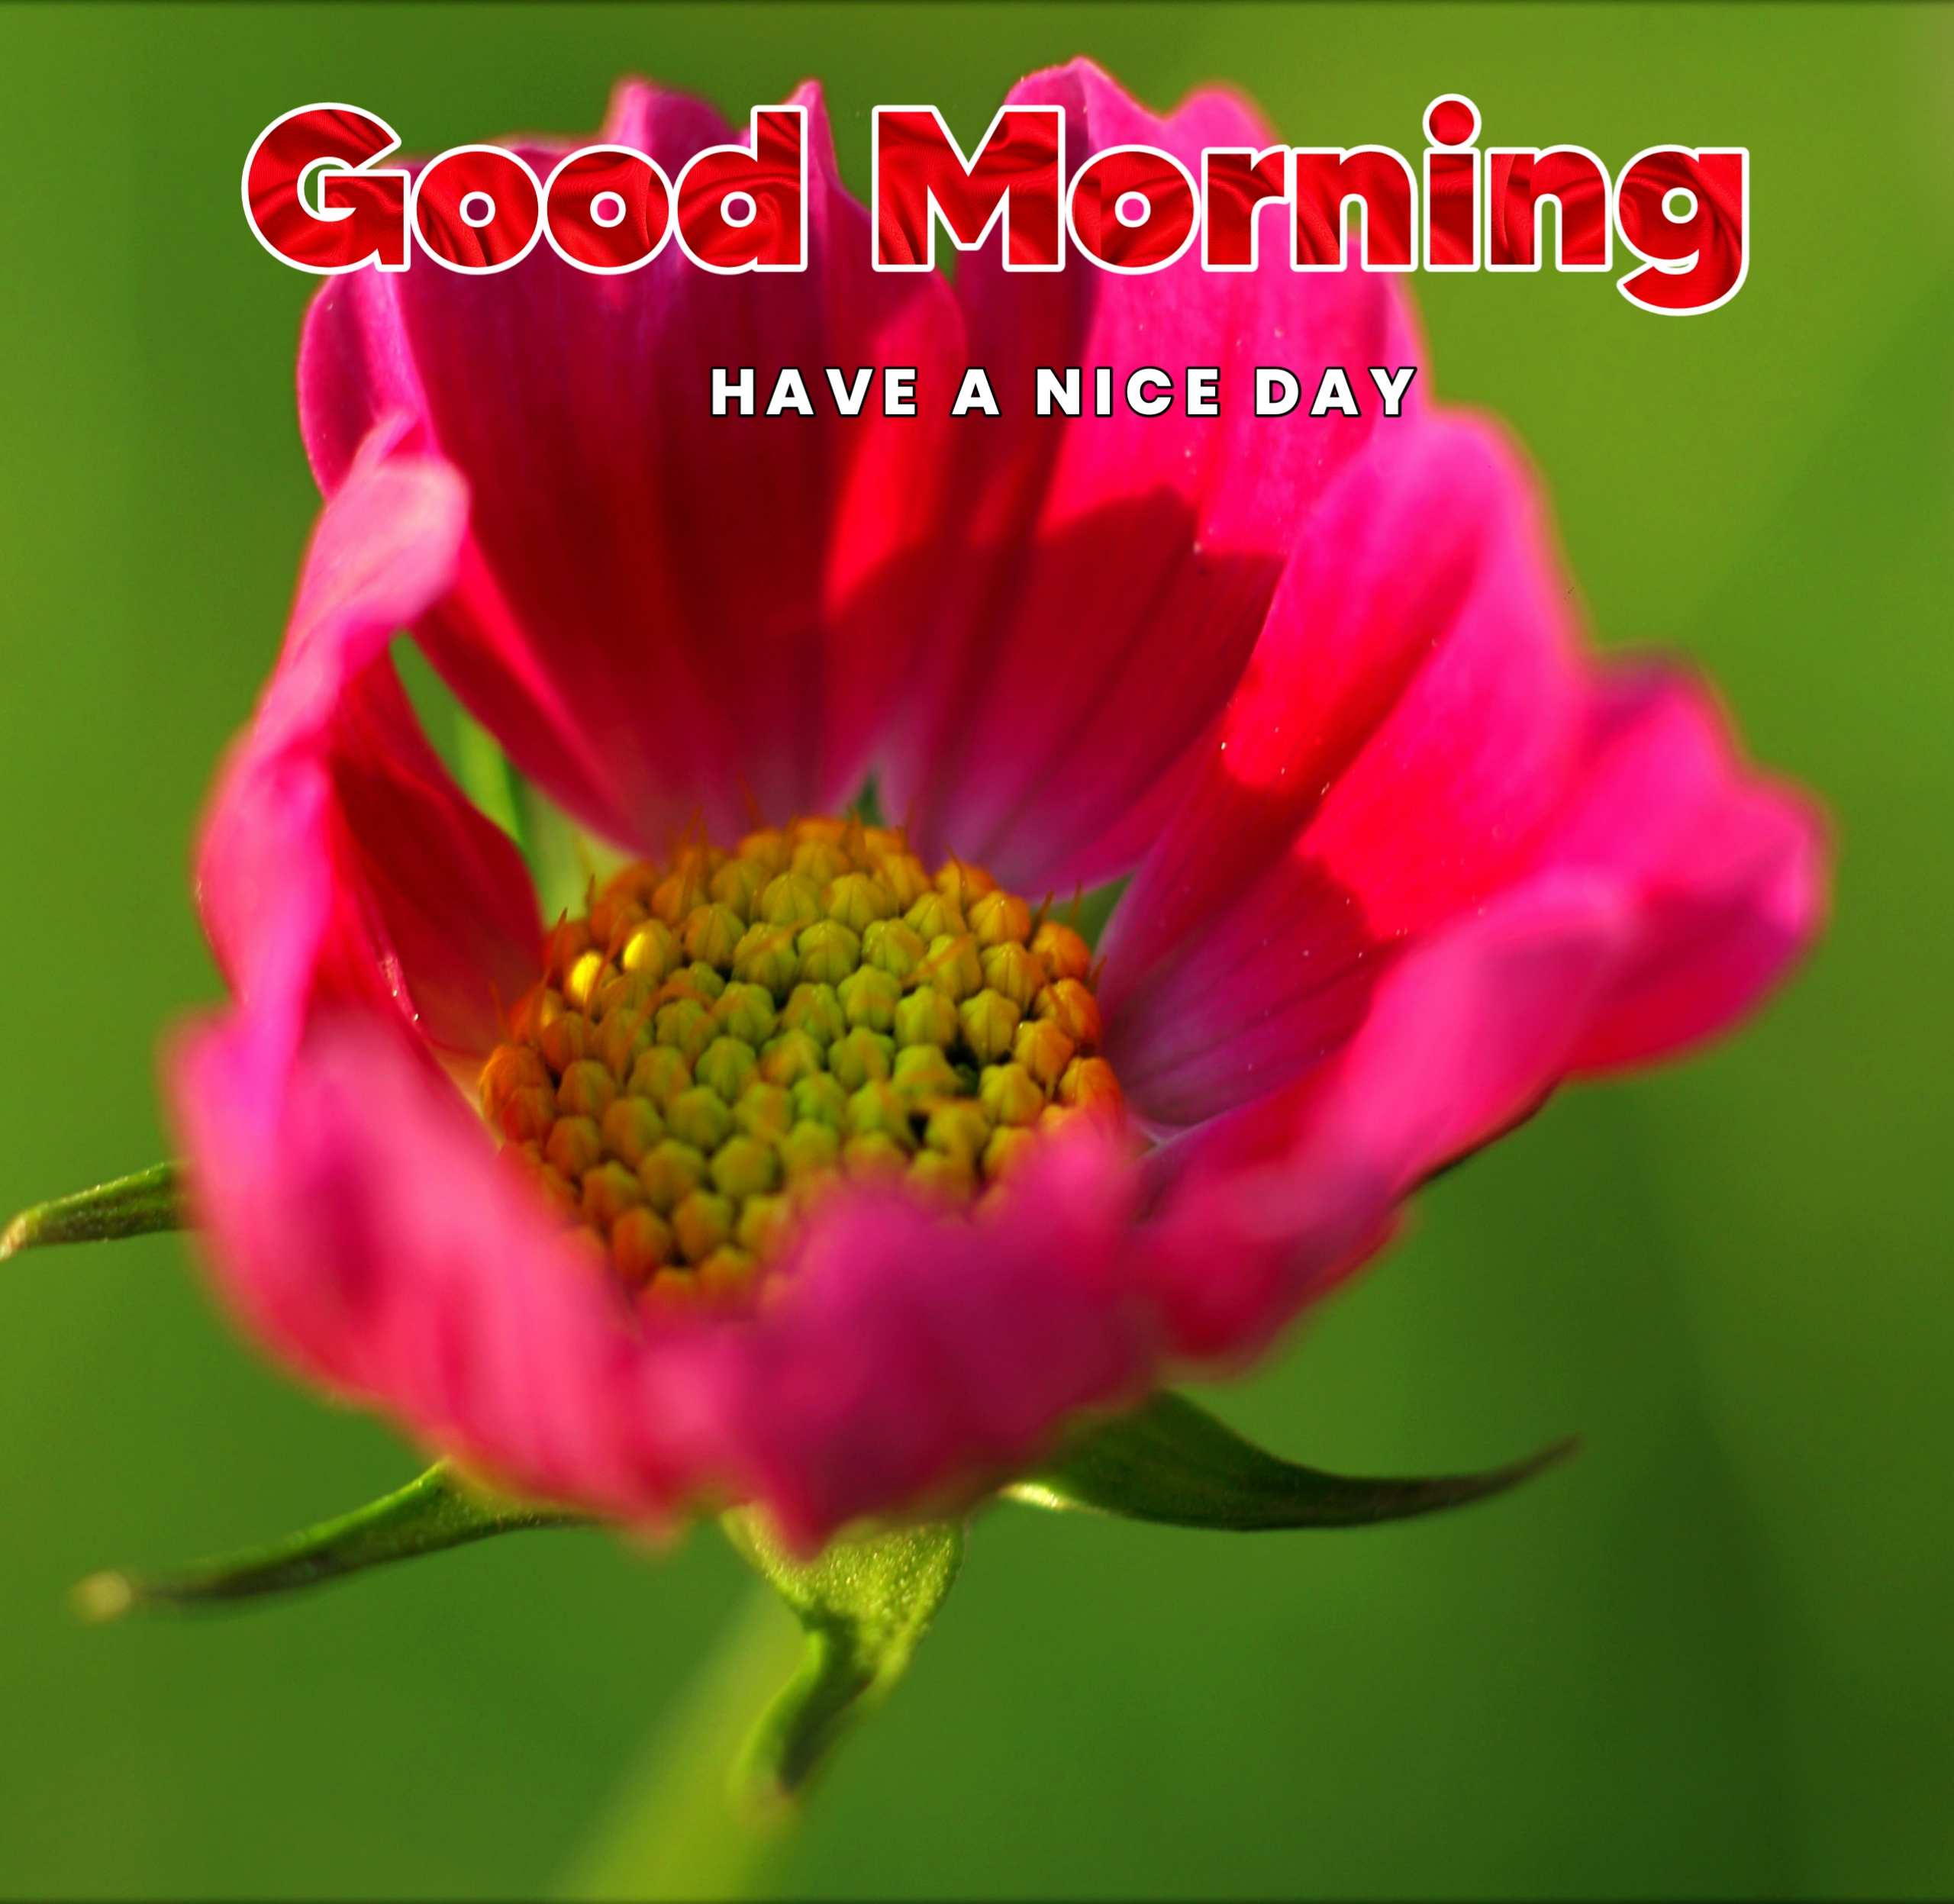 Good Morning Image With Red Flower 